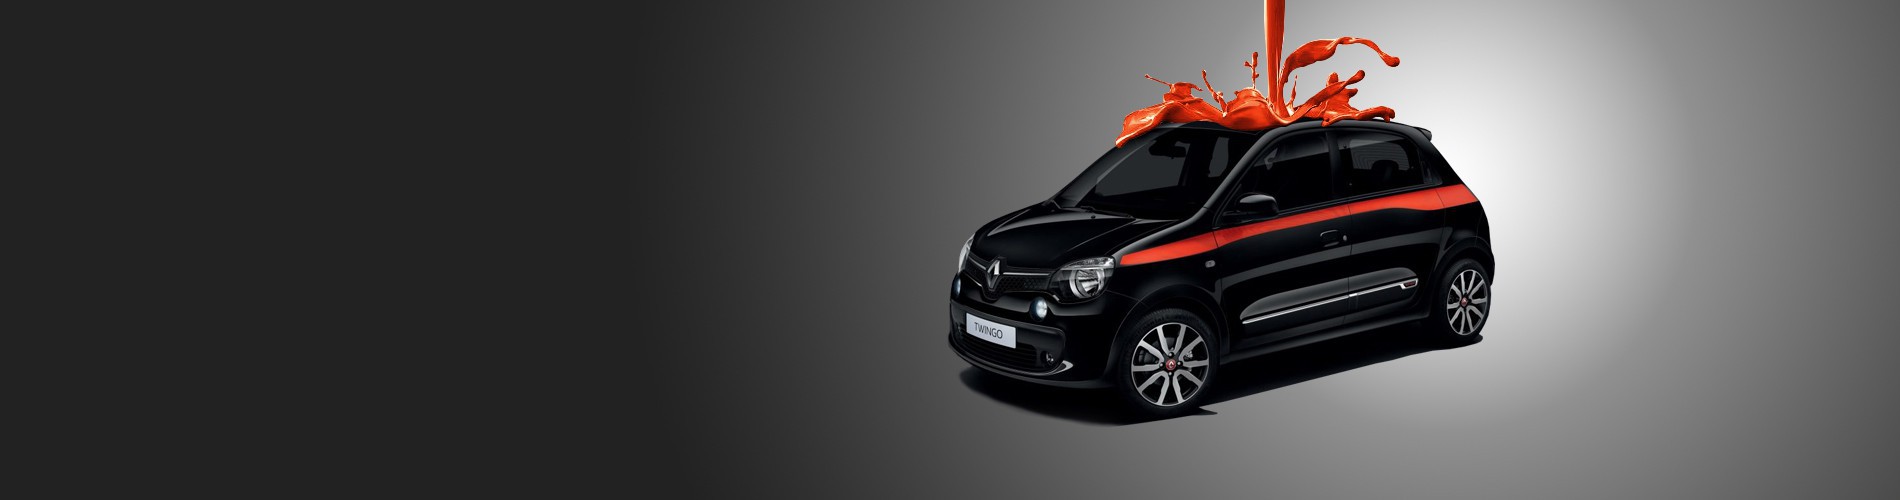 Ma Belle Voiture - Twingo Deco Stickers